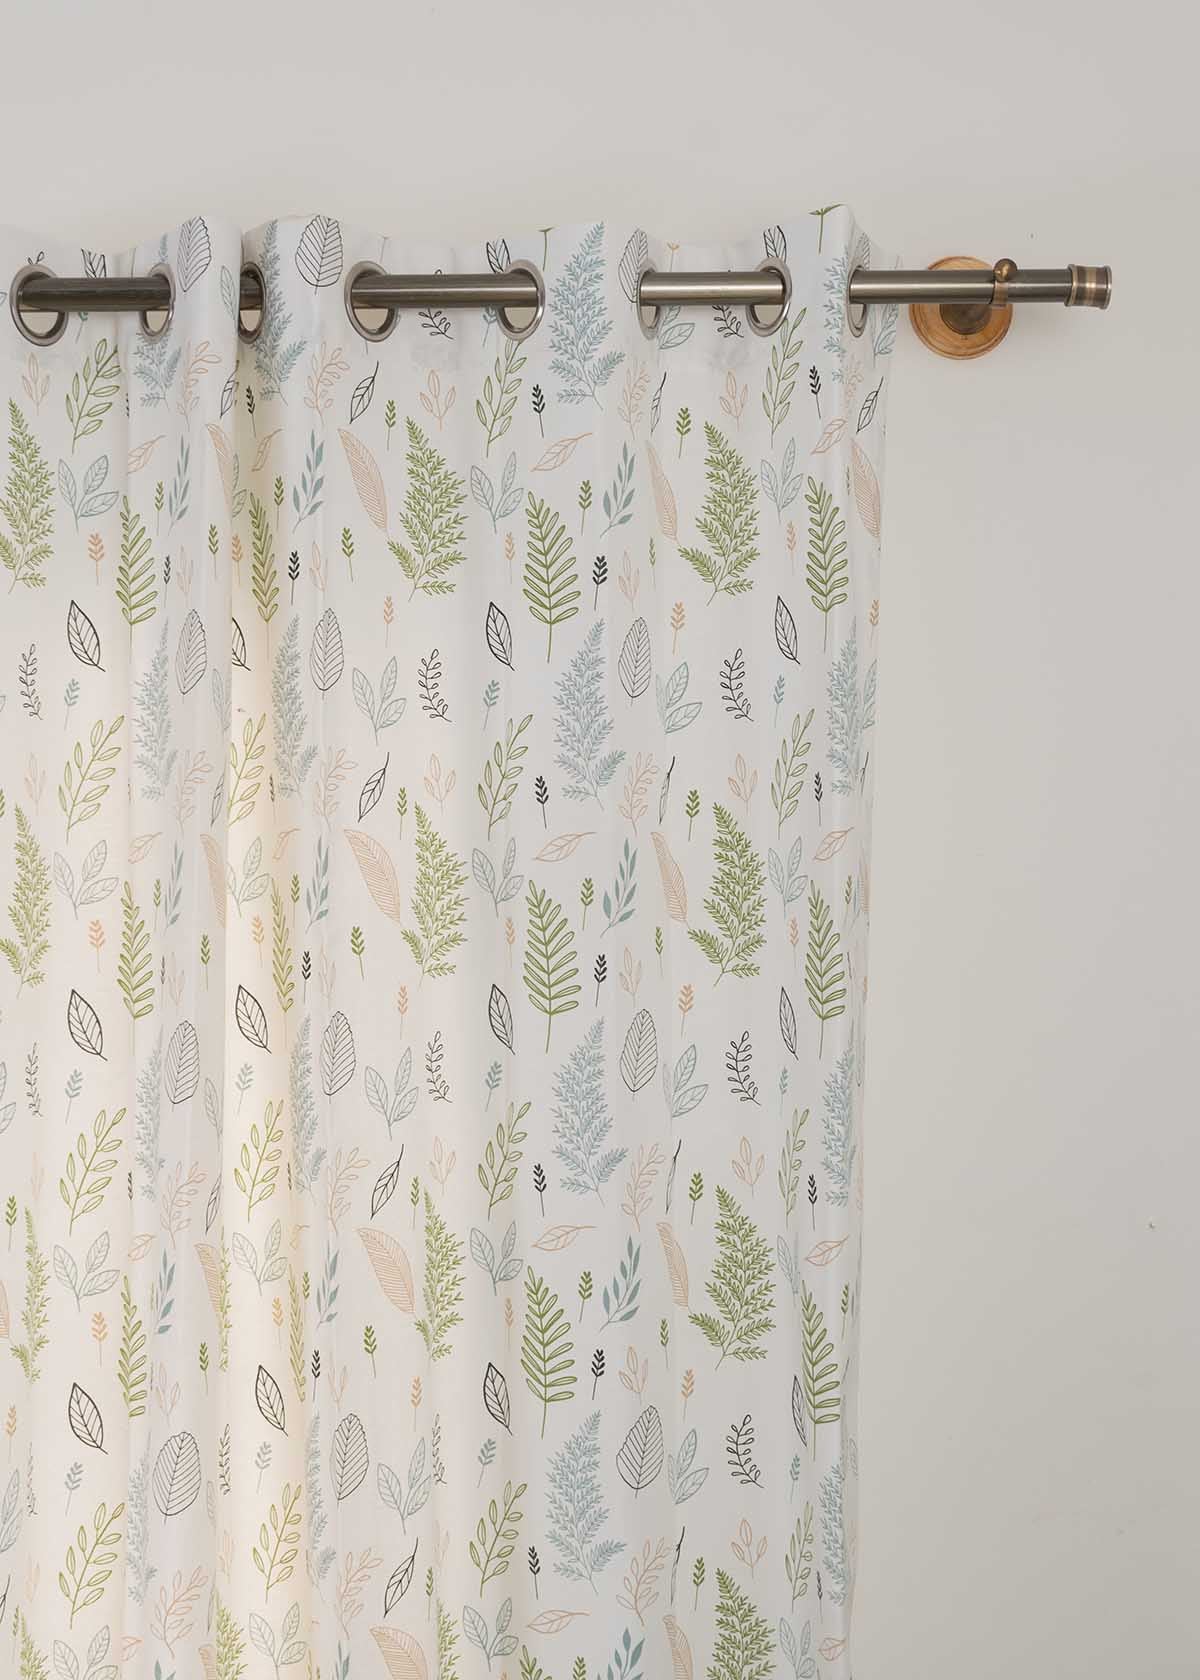 Rustling Leaves Printed Cotton Curtain - Green